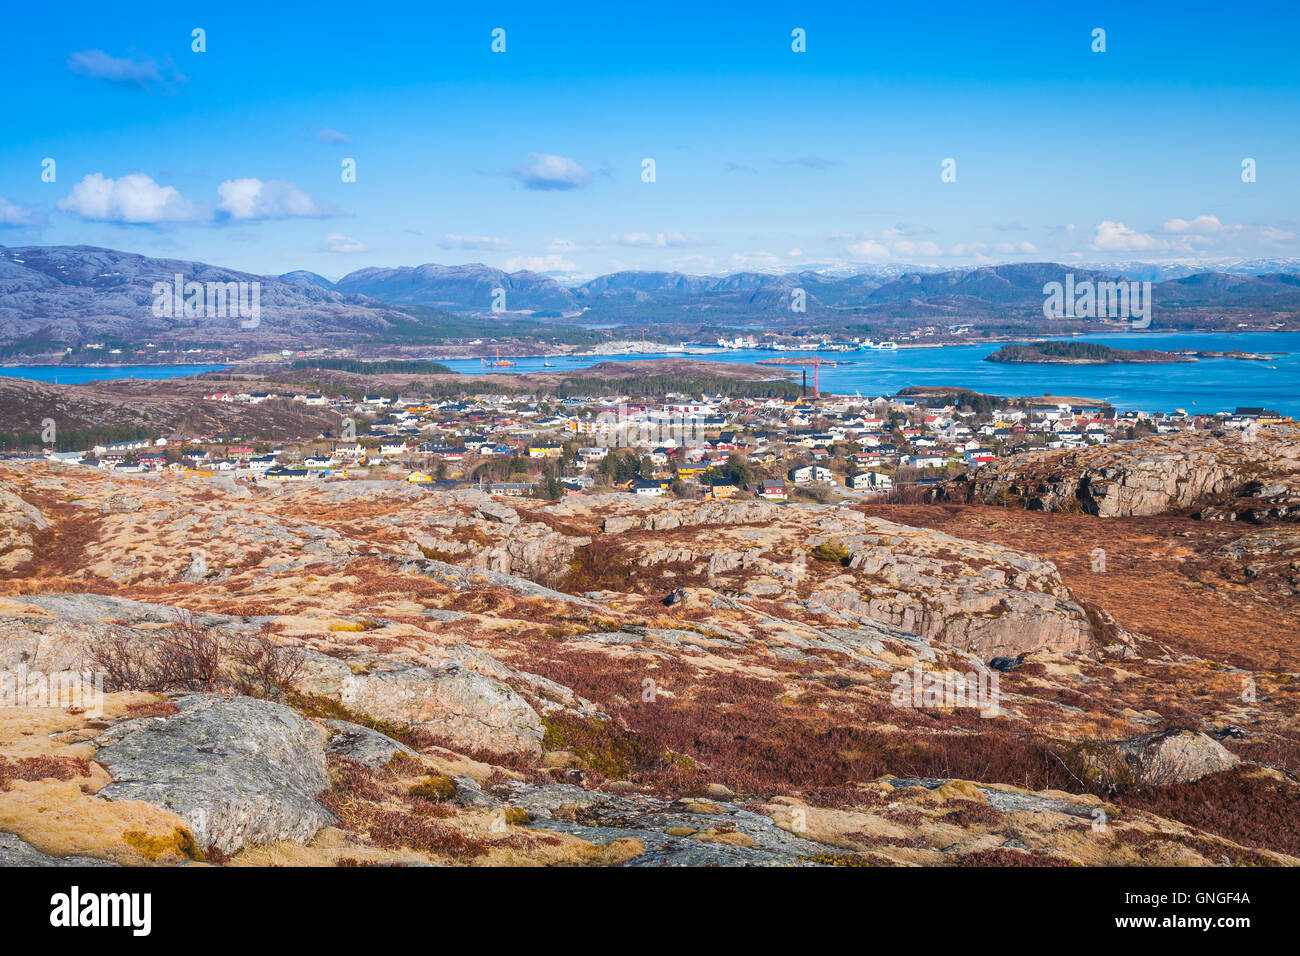 Northern Norway in springtime. Mountain landscape with red moss growing on rocks Stock Photo